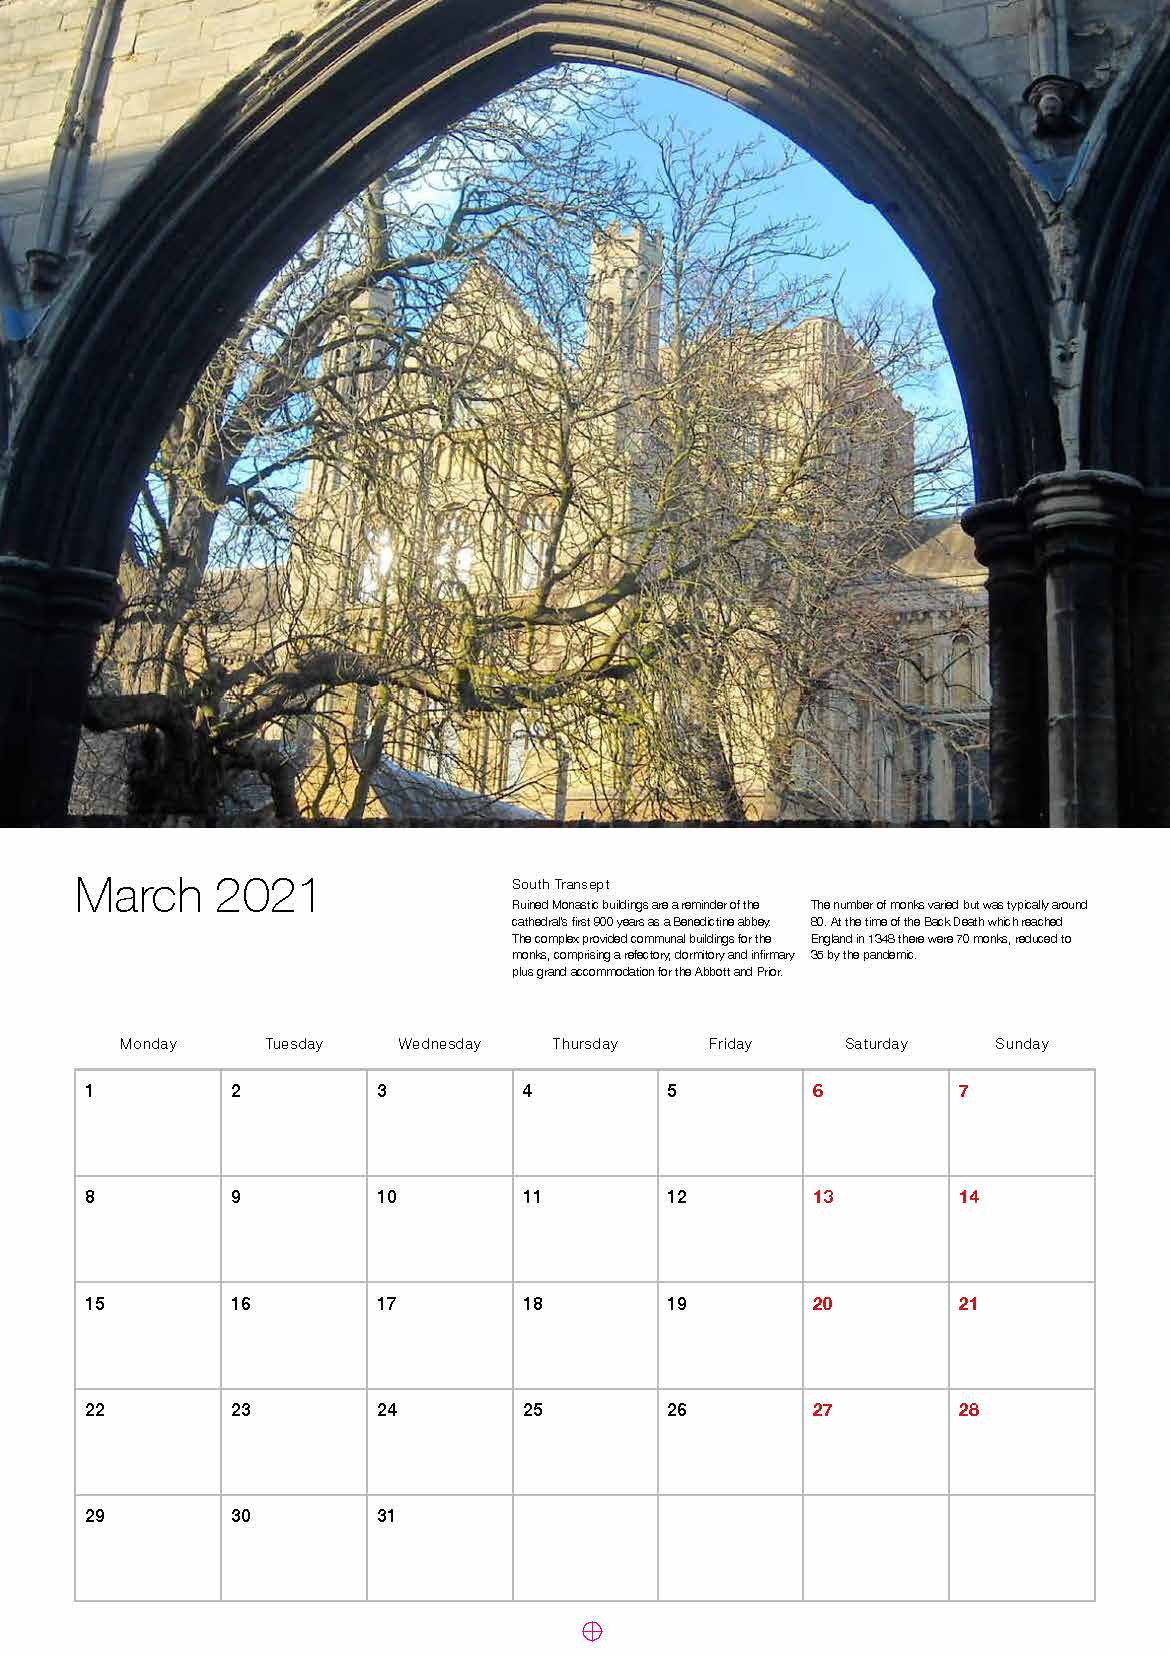 The 2021 Cathedral calendar goes on sale Peterborough Cathedral